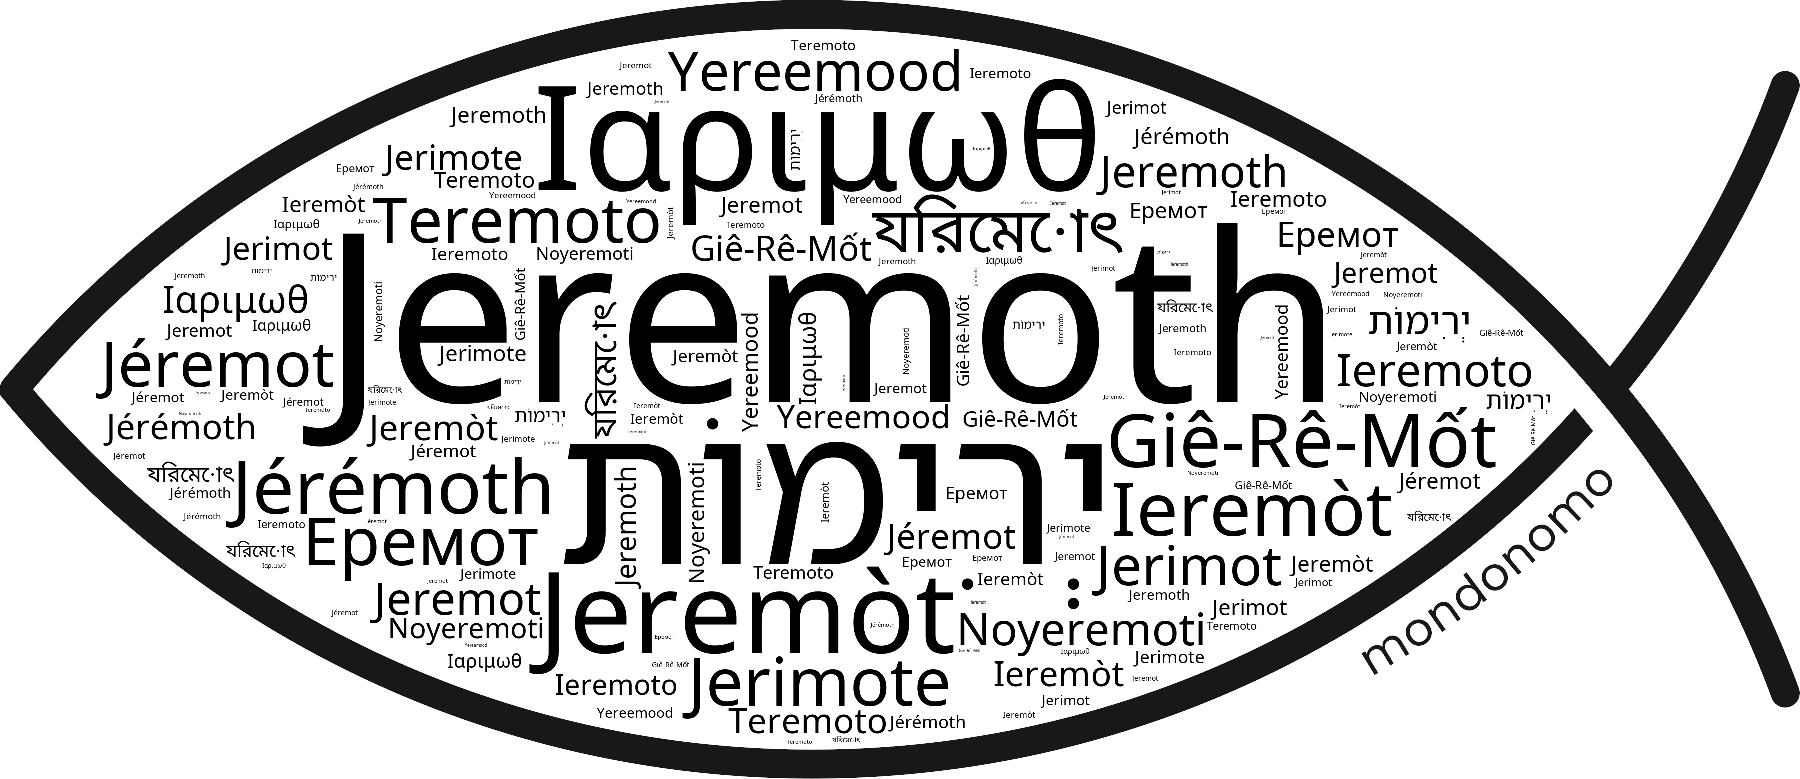 Name Jeremoth in the world's Bibles